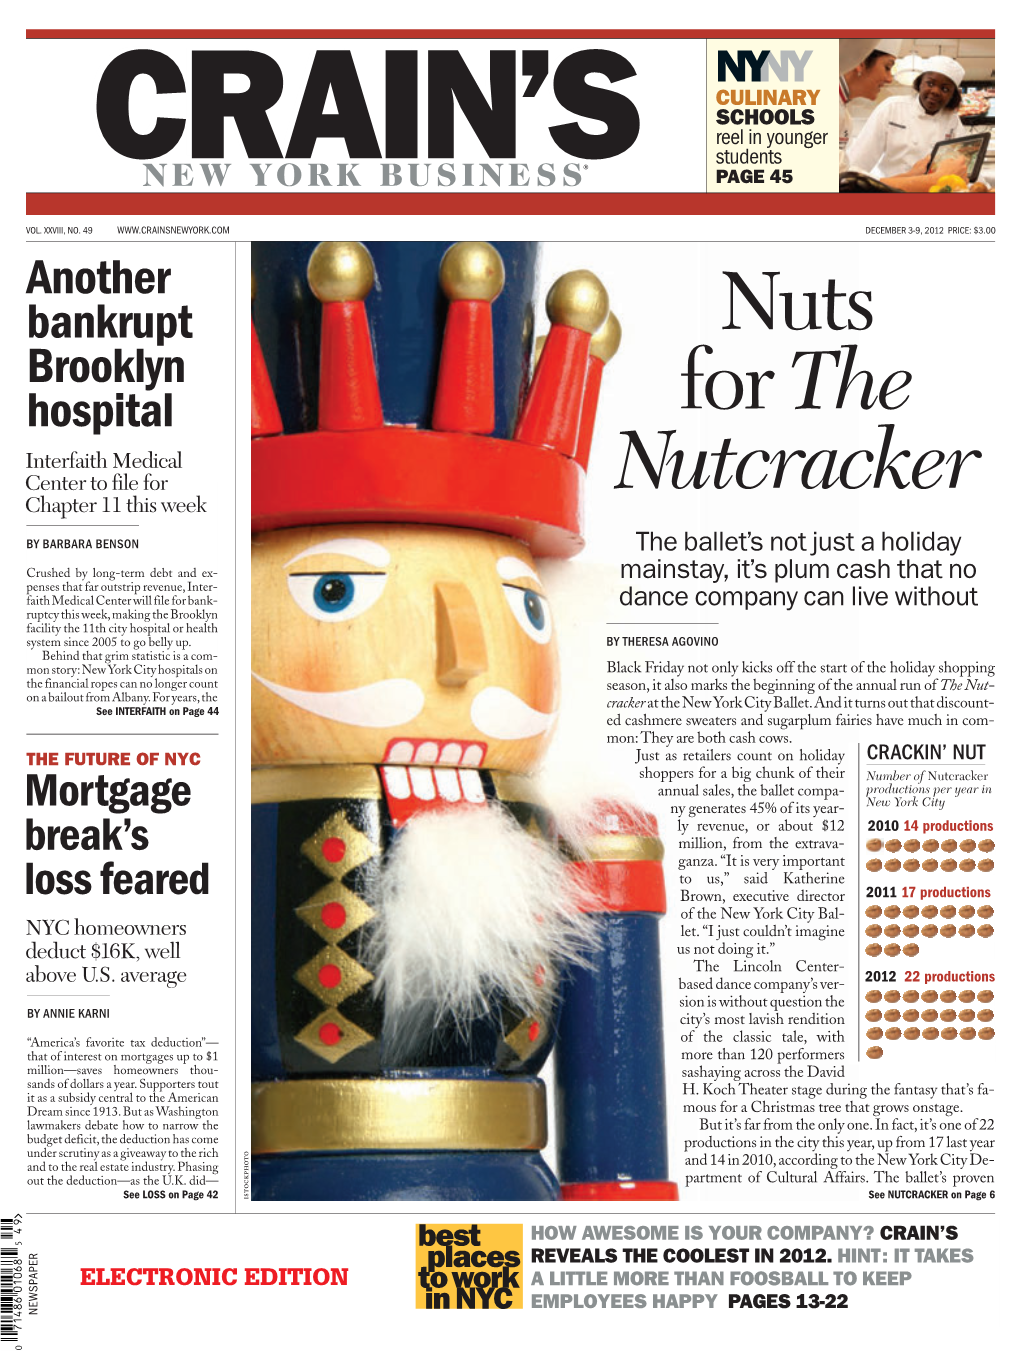 Nuts for the Nutcracker